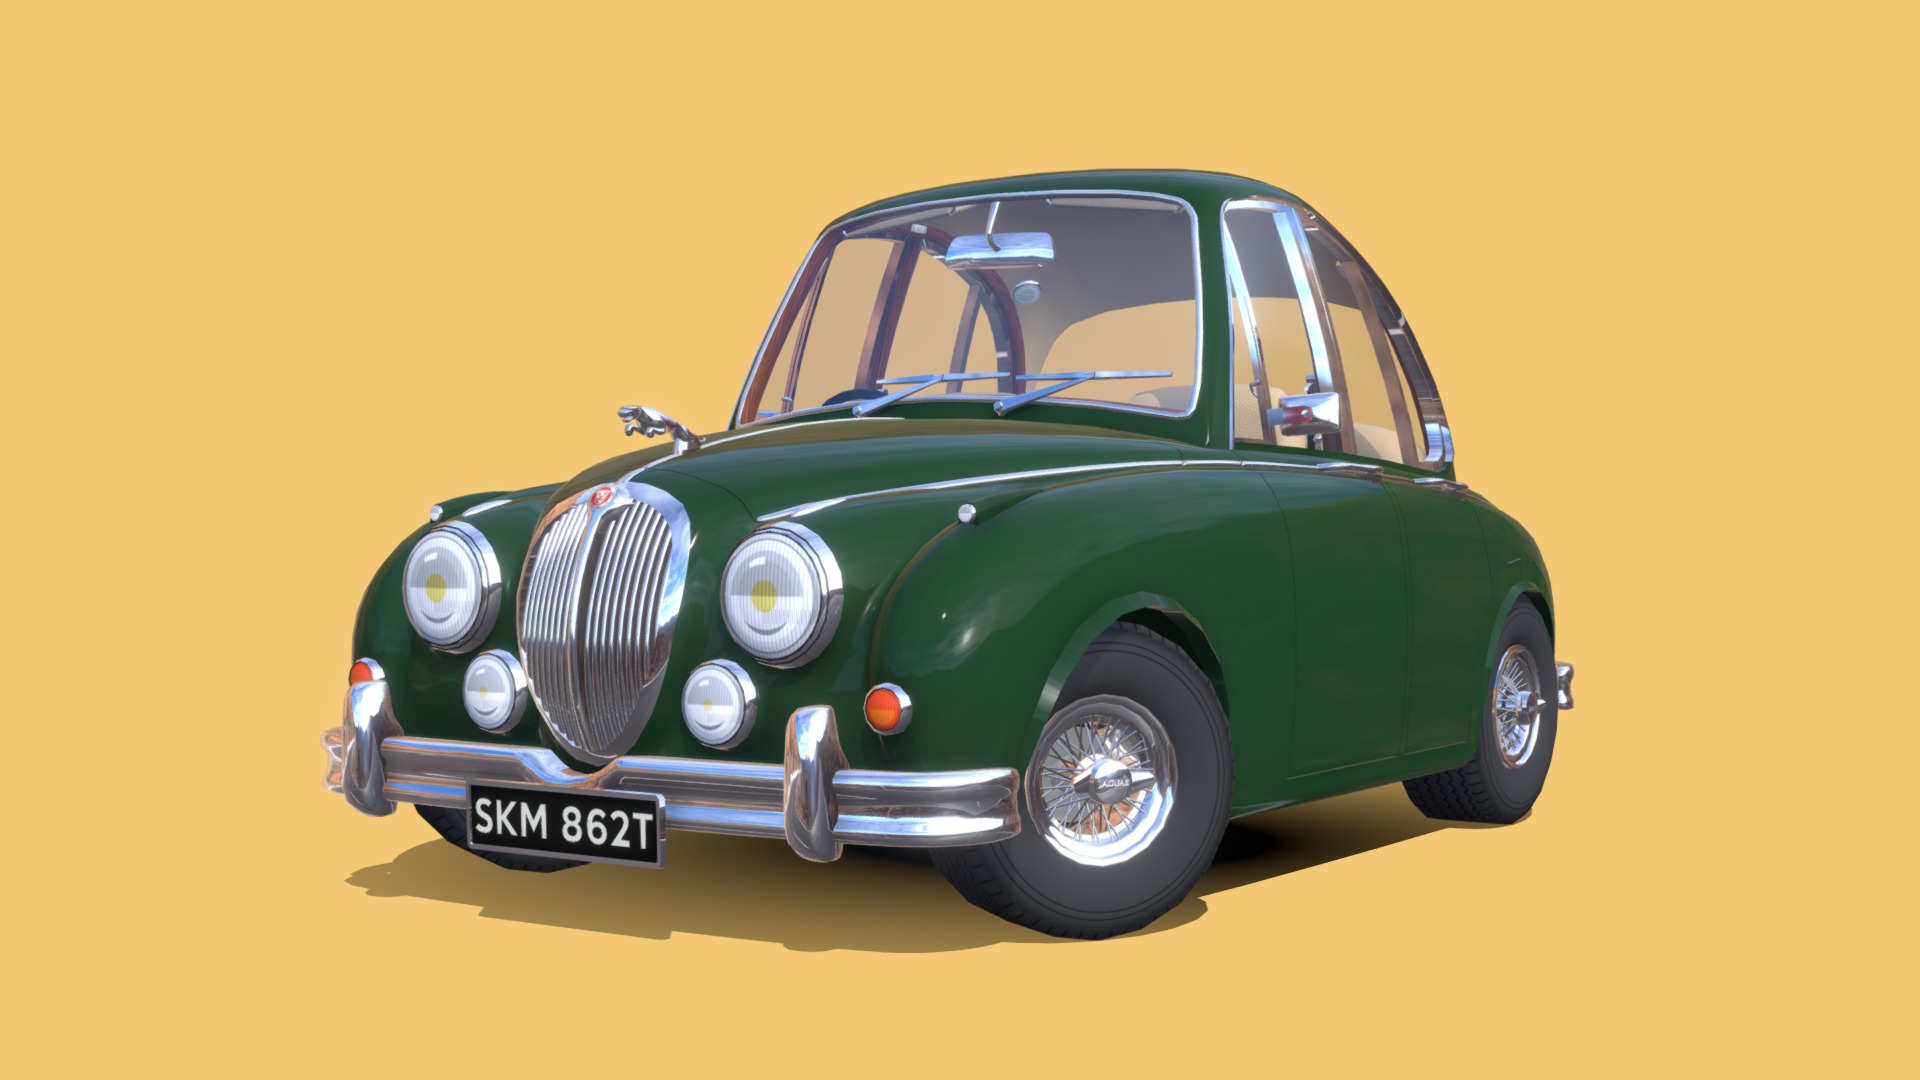 3D model Jaguar MK2 cartoon stylized - This is a 3D model of the Jaguar MK2 cartoon stylized. The 3D model is about a green car with a white background.